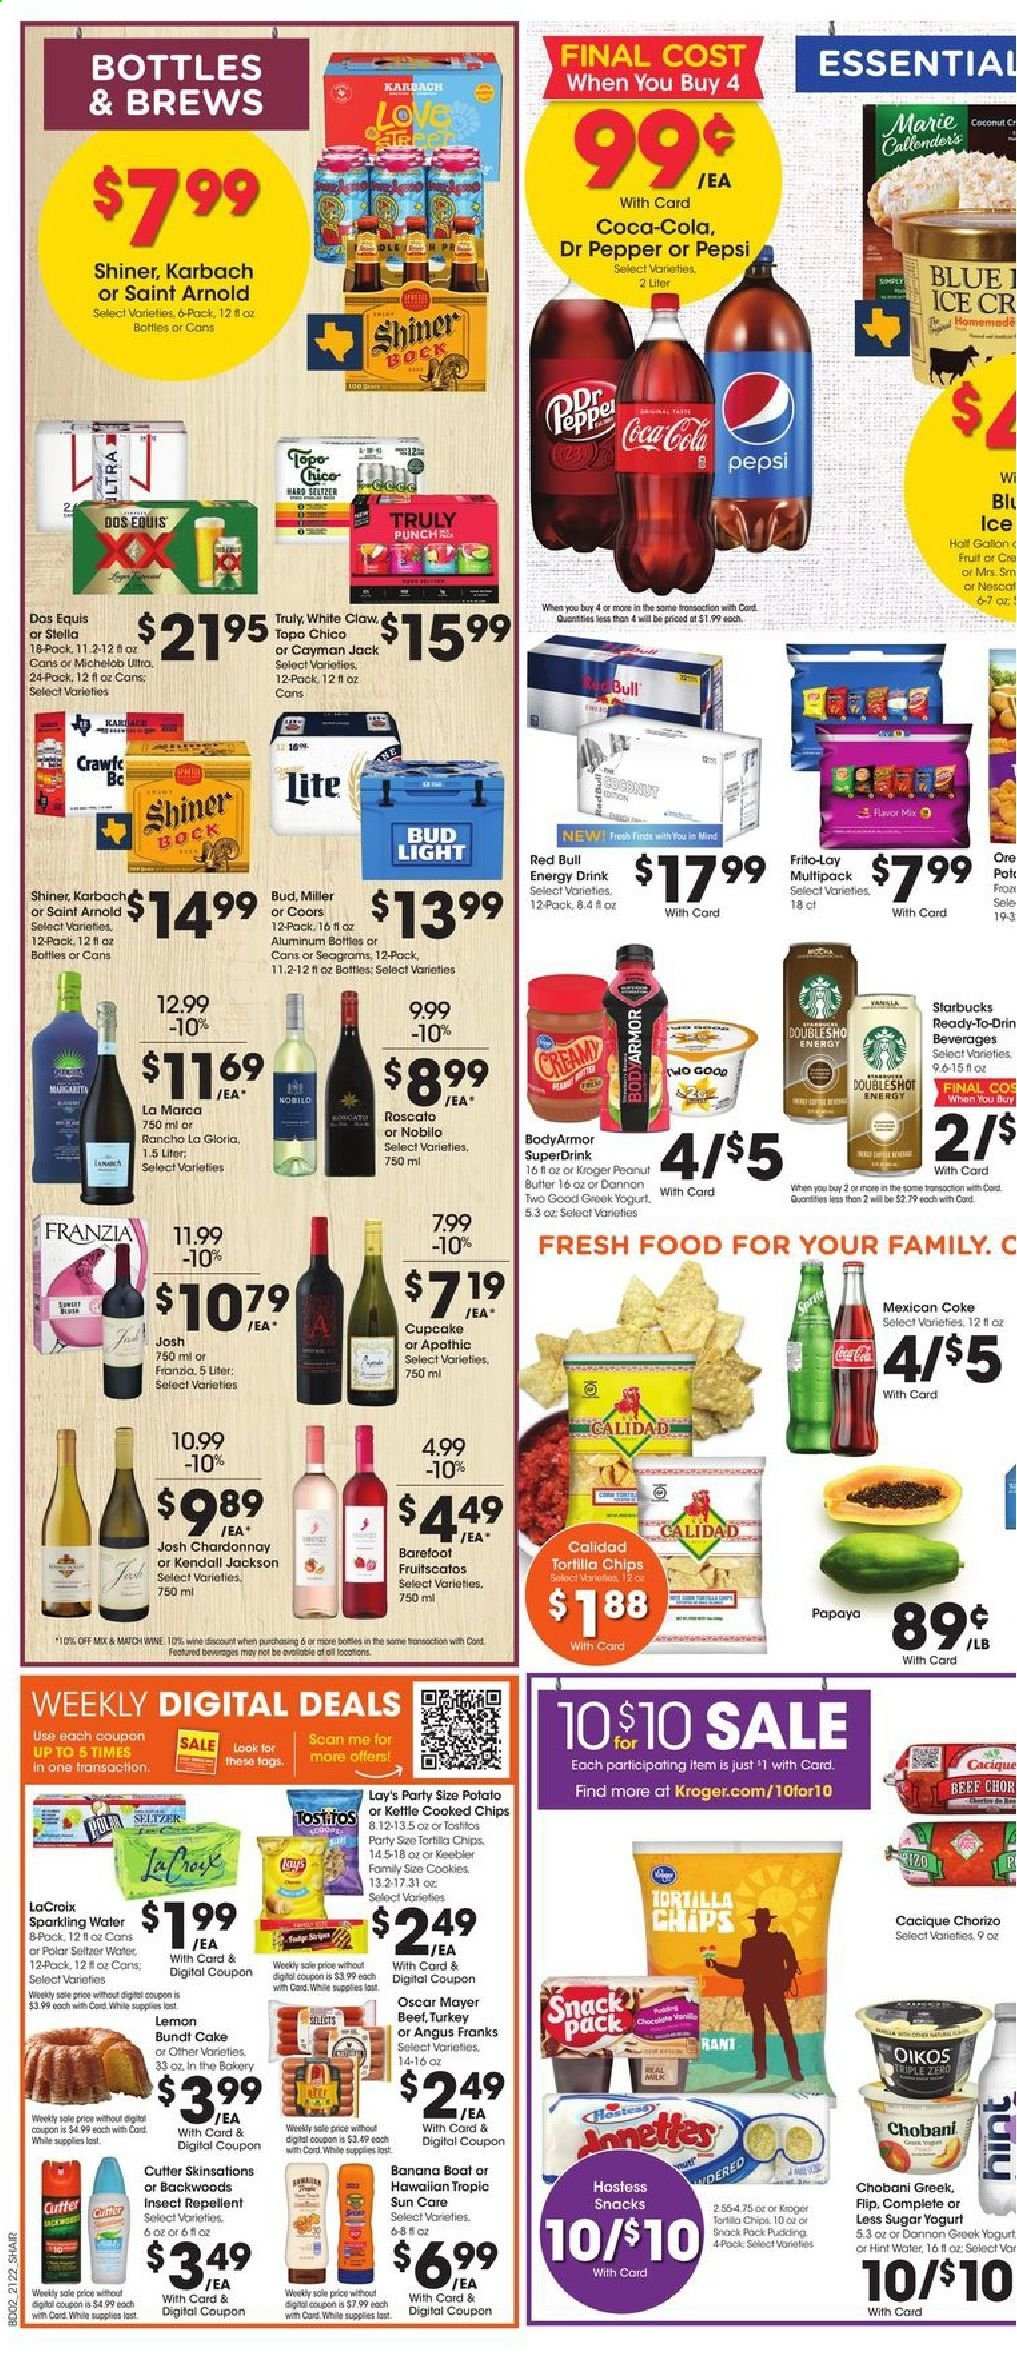 thumbnail - Kroger Flyer - 06/30/2021 - 07/06/2021 - Sales products - cake, bundt, cupcake, papaya, coconut, chorizo, Oscar Mayer, greek yoghurt, yoghurt, Oikos, Chobani, Dannon, cookies, Keebler, tortilla chips, chips, Lay’s, Frito-Lay, Tostitos, peanut butter, Coca-Cola, Pepsi, energy drink, Dr. Pepper, Red Bull, seltzer water, sparkling water, Starbucks, white wine, Chardonnay, wine, White Claw, TRULY, beer, Coors, Dos Equis, Michelob, Bud Light, Miller, Shiner Bock, gallon, pot, cutter, kettle. Page 5.